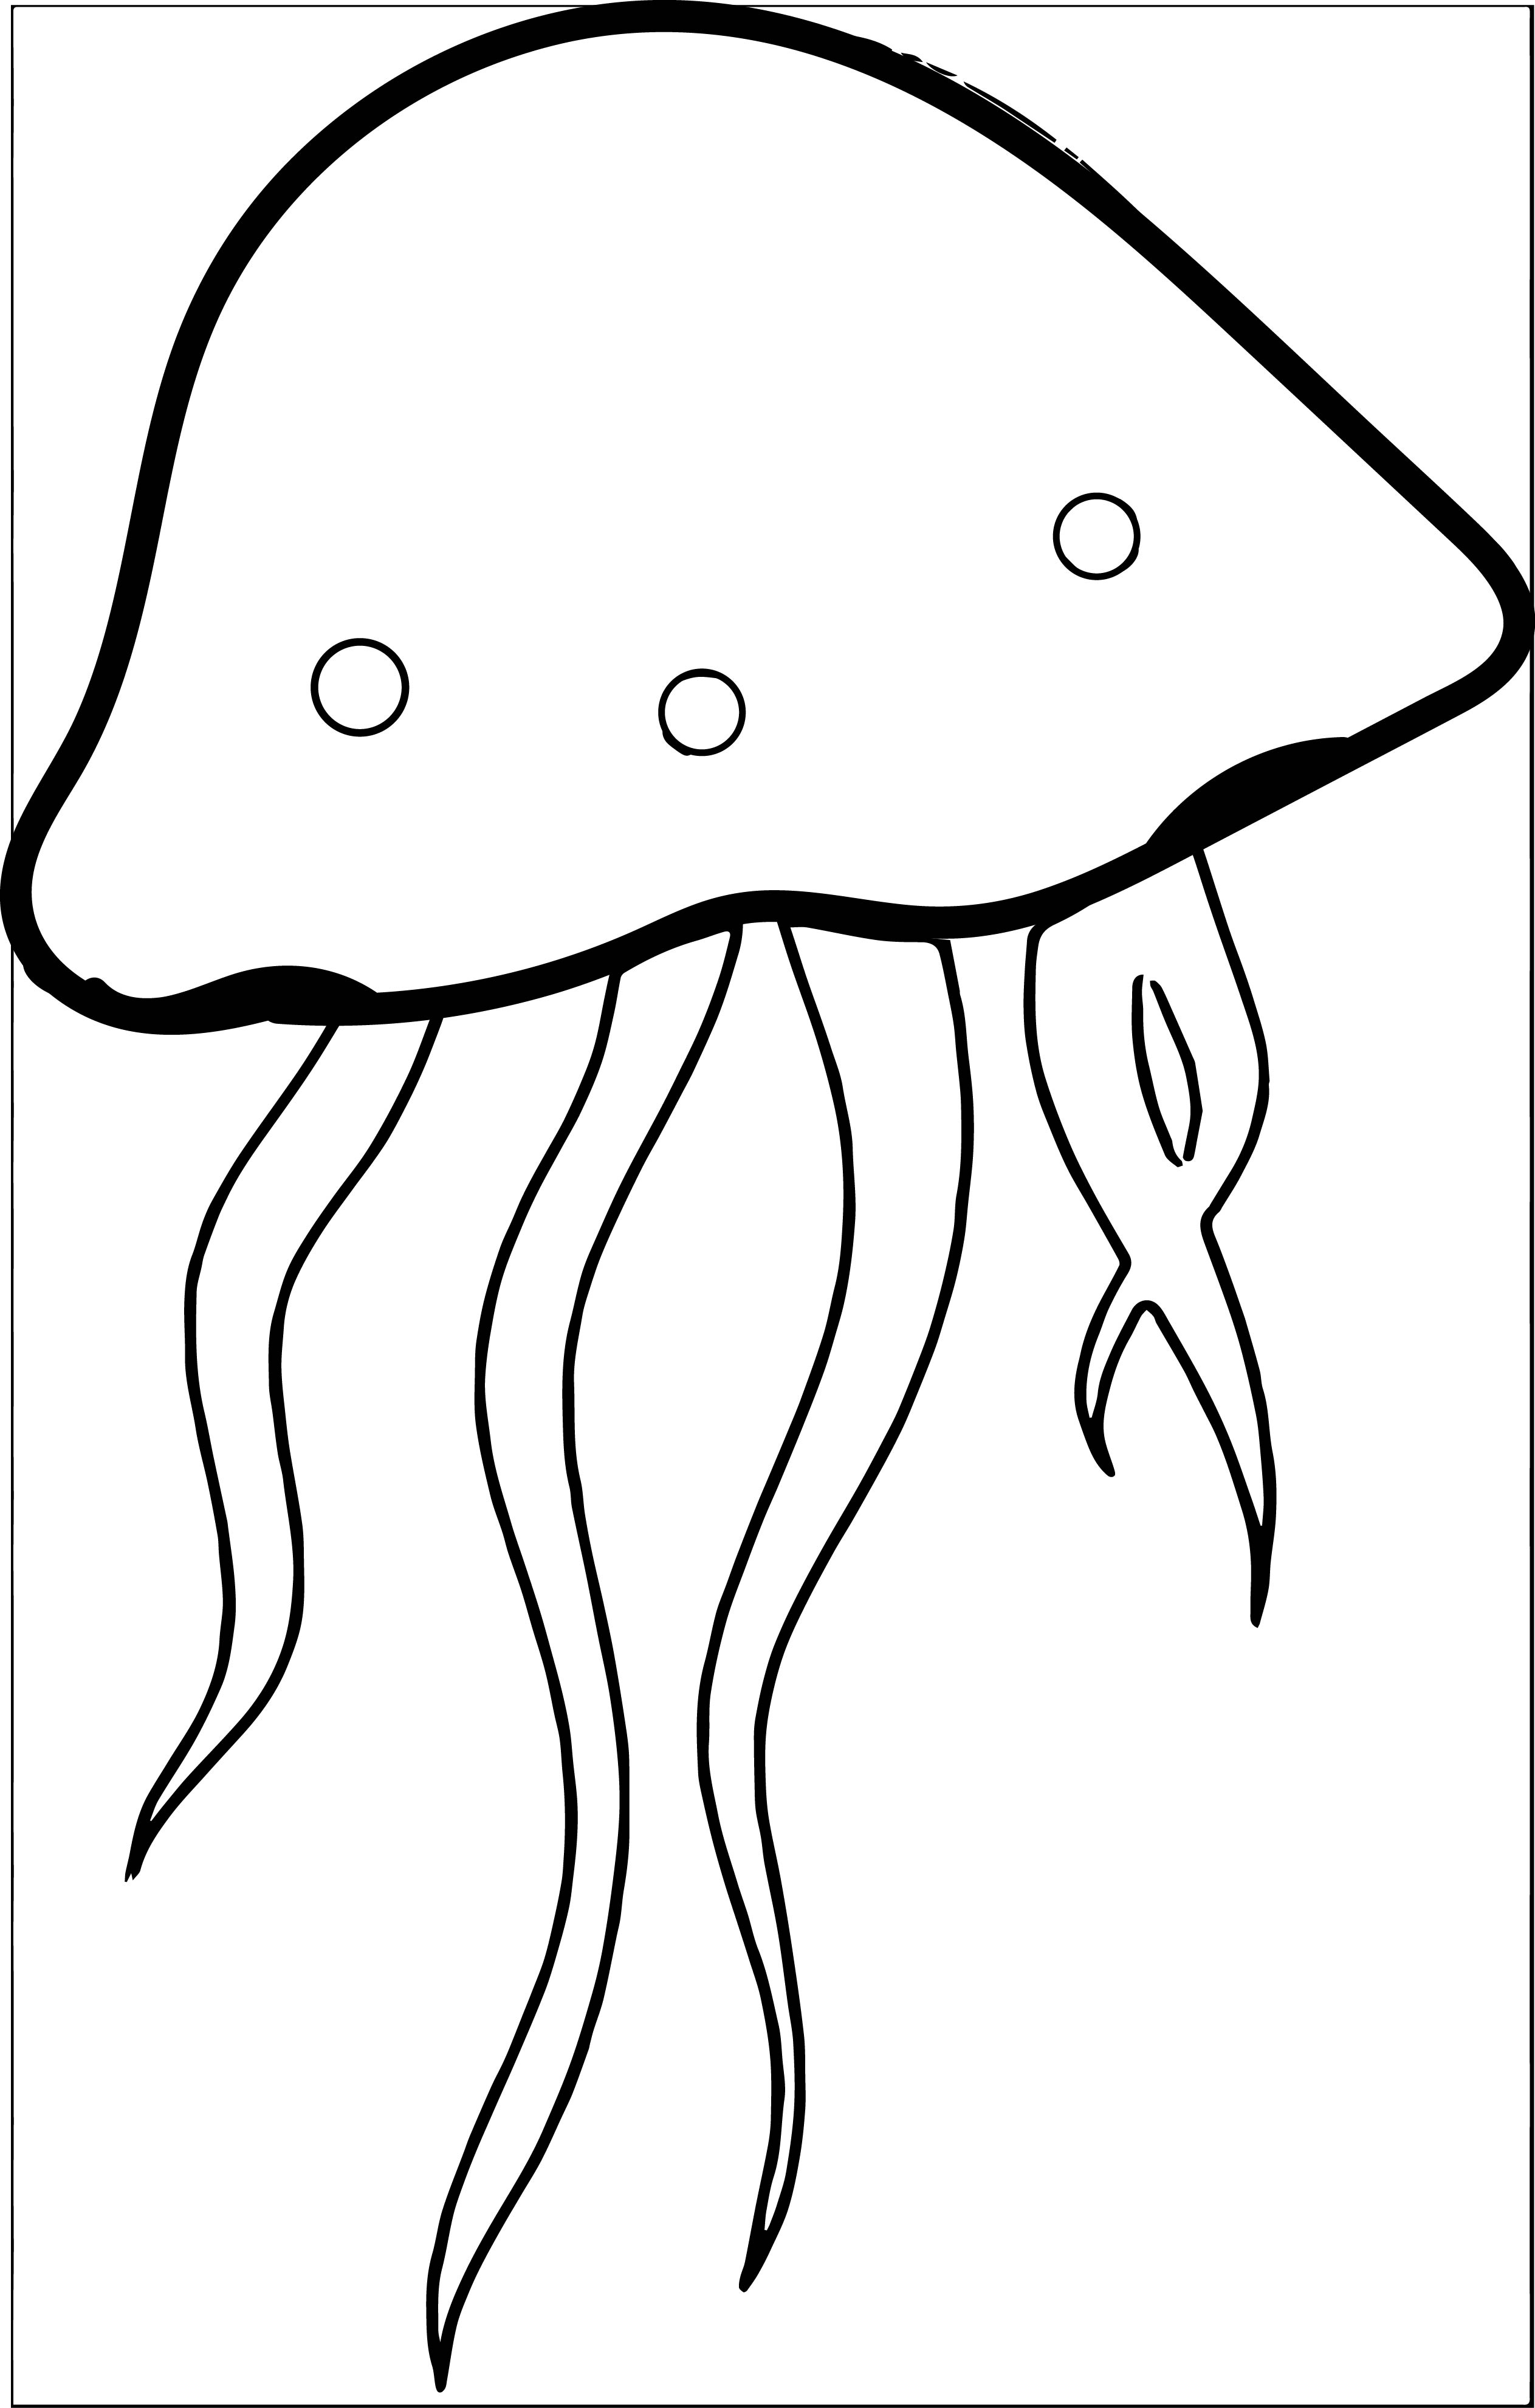 clipart for jellyfish - photo #26